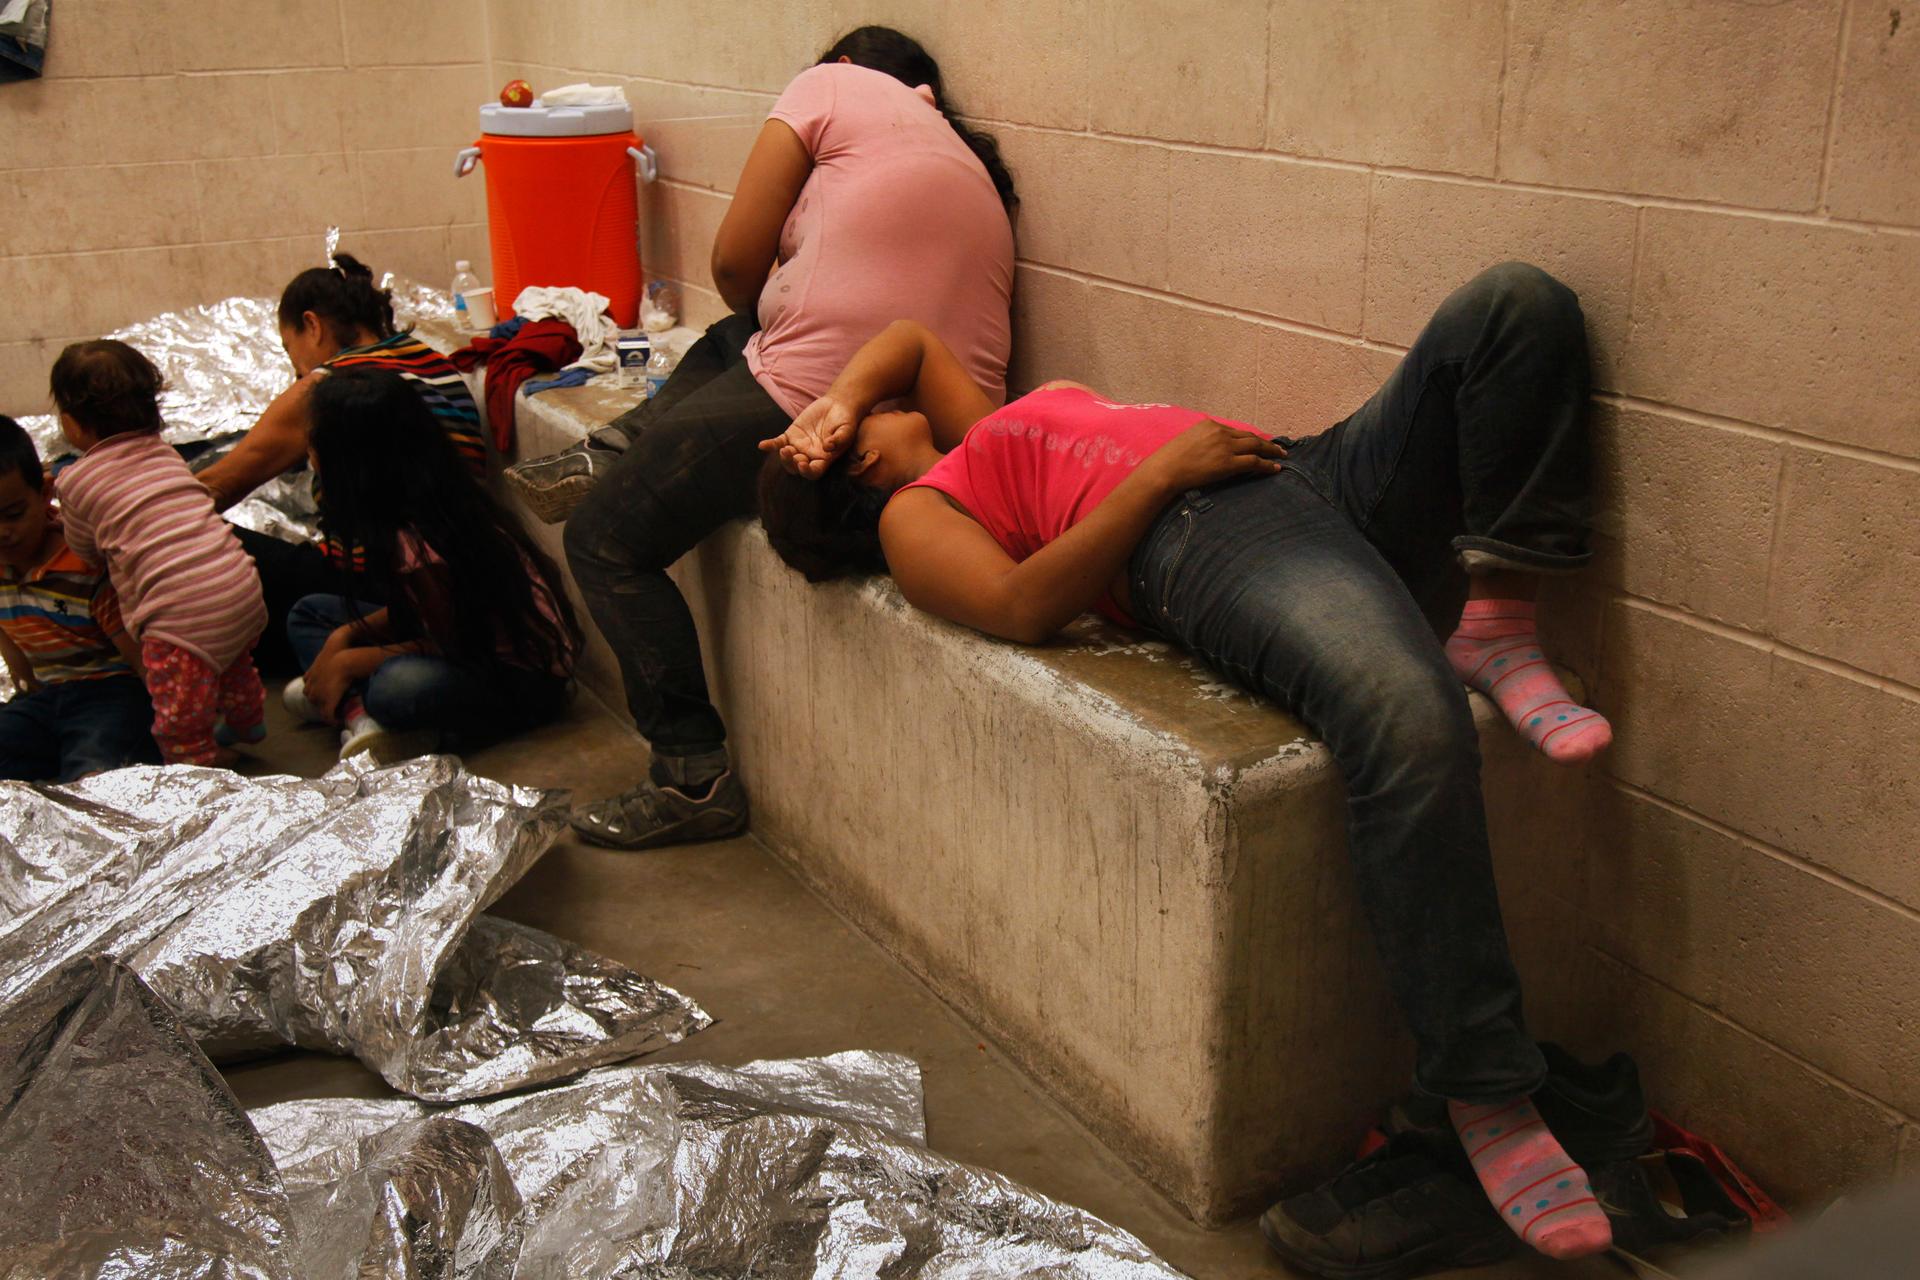 Immigrants who have been caught crossing the border illegally are housed inside the Border Patrol Station in McAllen, Texas where they are processed. More than 57,000 unaccompanied children have been apprehended at the southwestern border since October, m